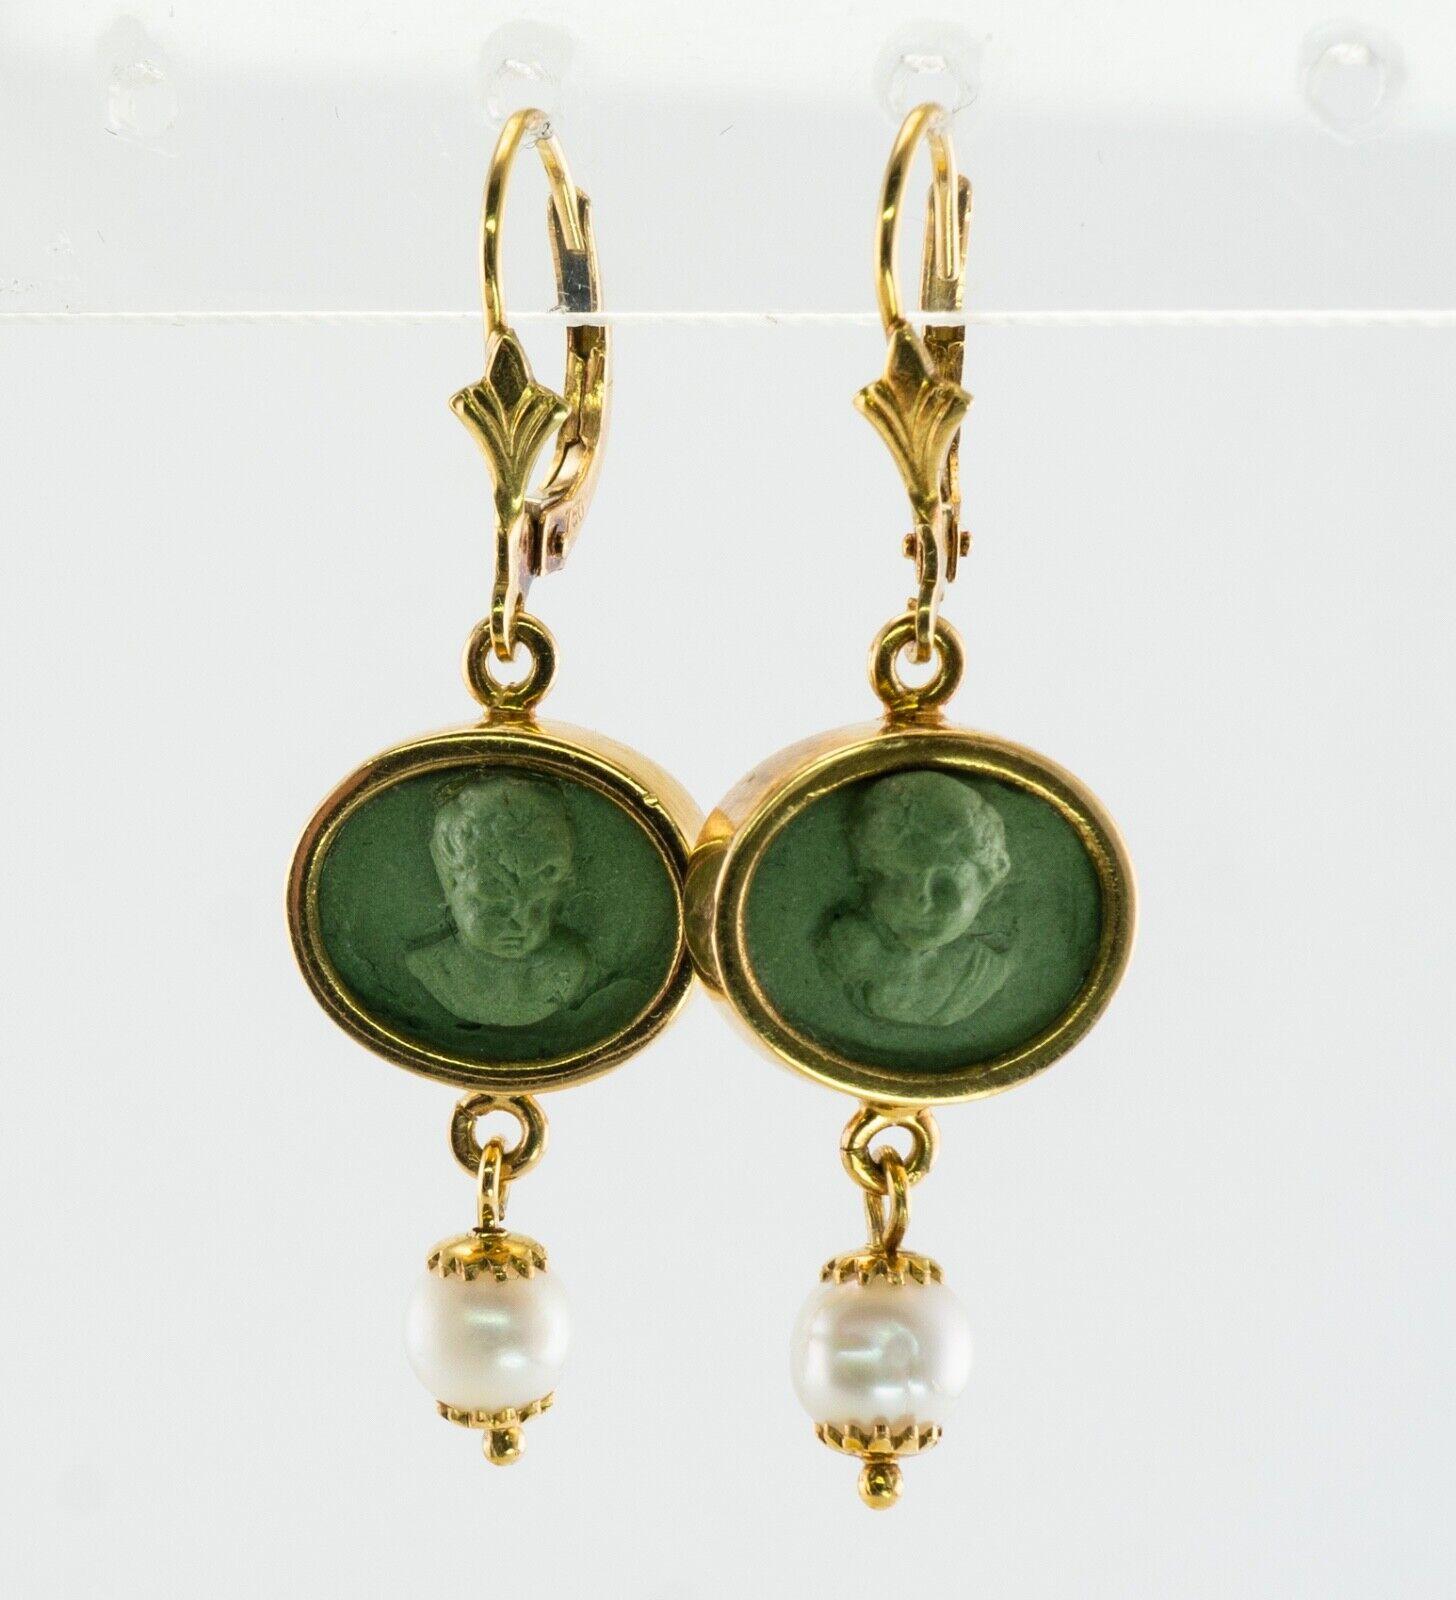 Cherub Angel Cameo Pearl Lava Earrings 18K Gold

This gorgeous pair of earrings is finely crafted in solid 18K Yellow gold, they also have a hallmark. Green volcanic Lava high profile cameos depict the head of cherubs or angels. They are highly